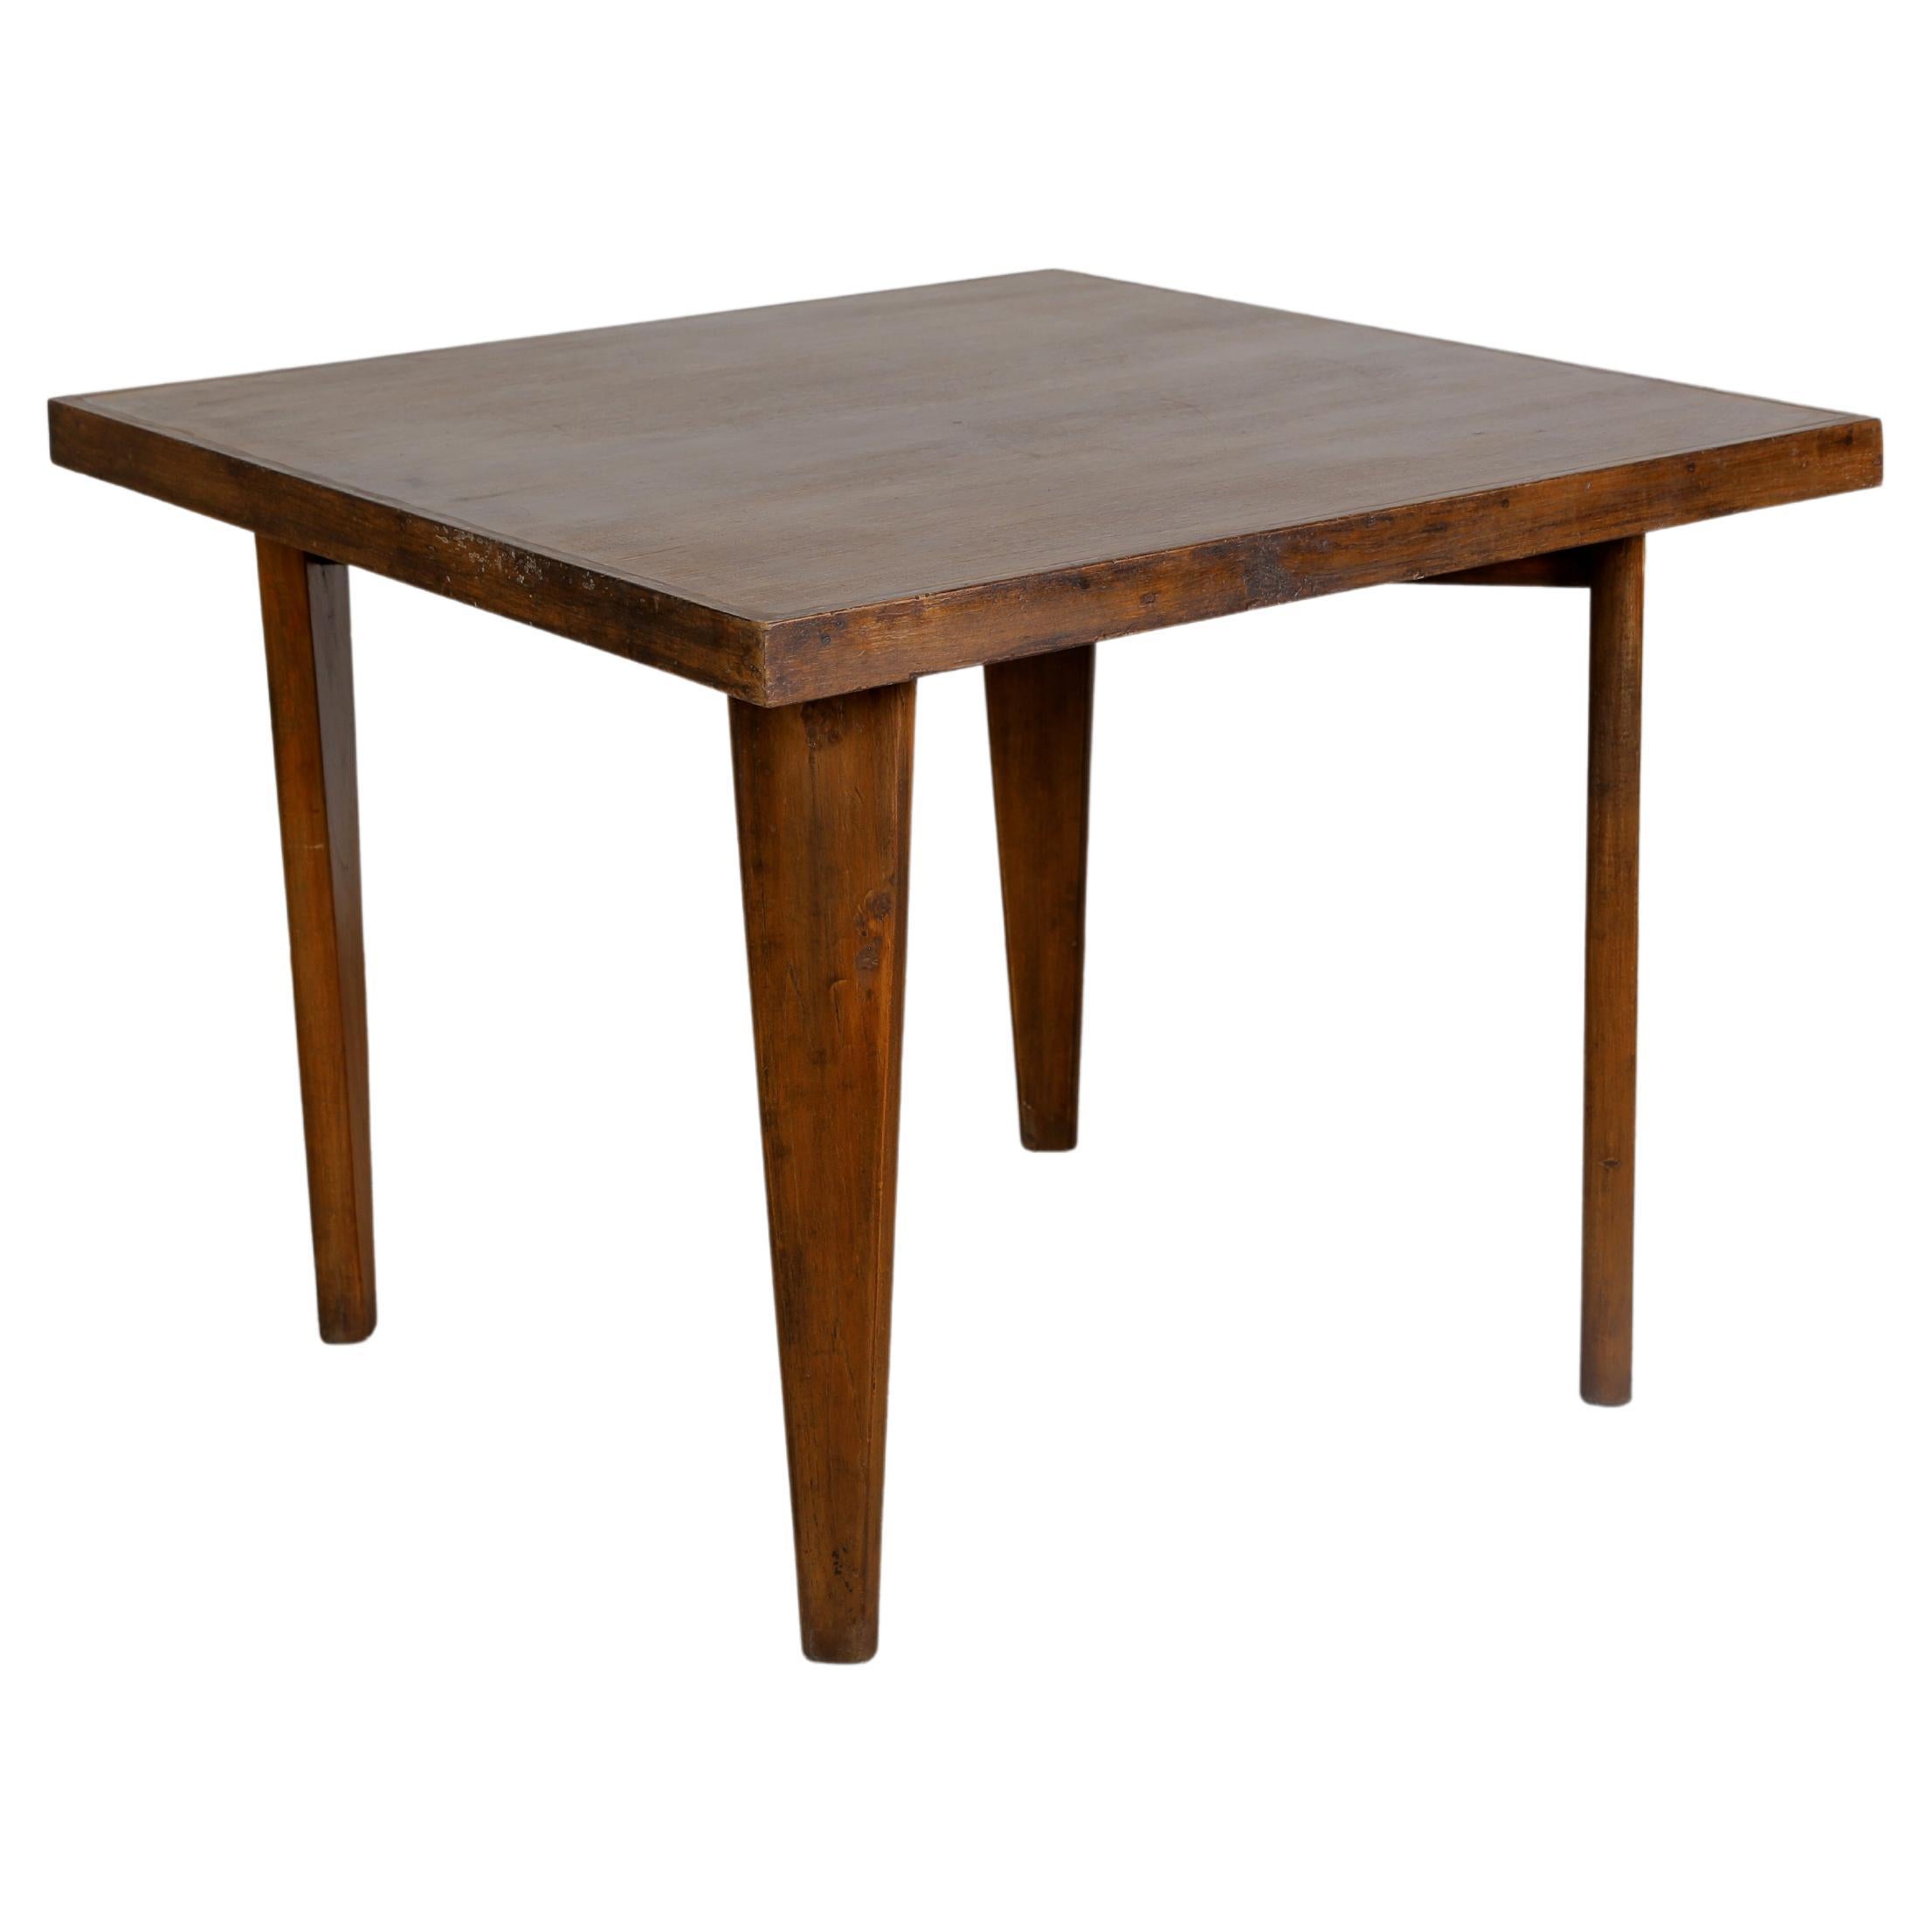 Pierre Jeanneret PJ-TA-04-A Square Table / Authentic Mid-Century Chandigarh